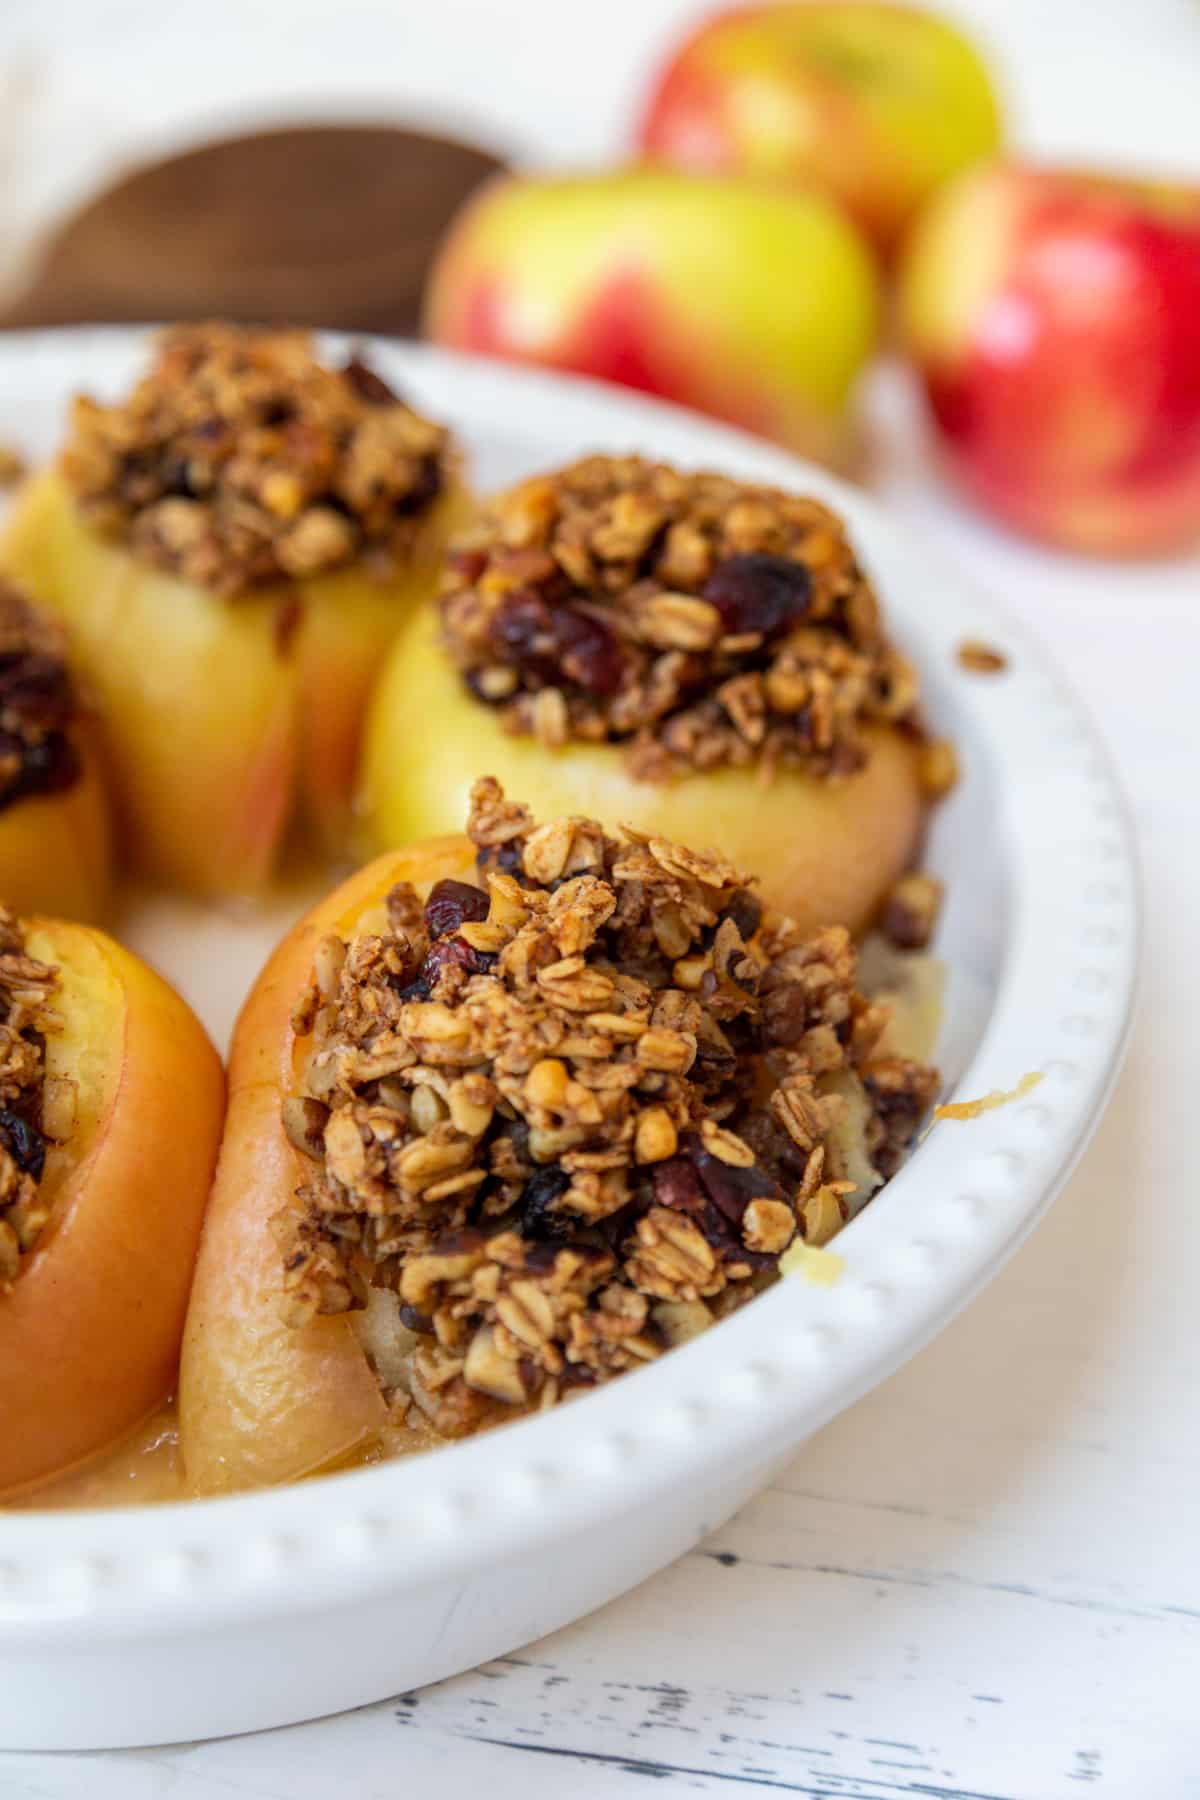 A white round baking dish with stuffed baked apples and raw apples in the background.